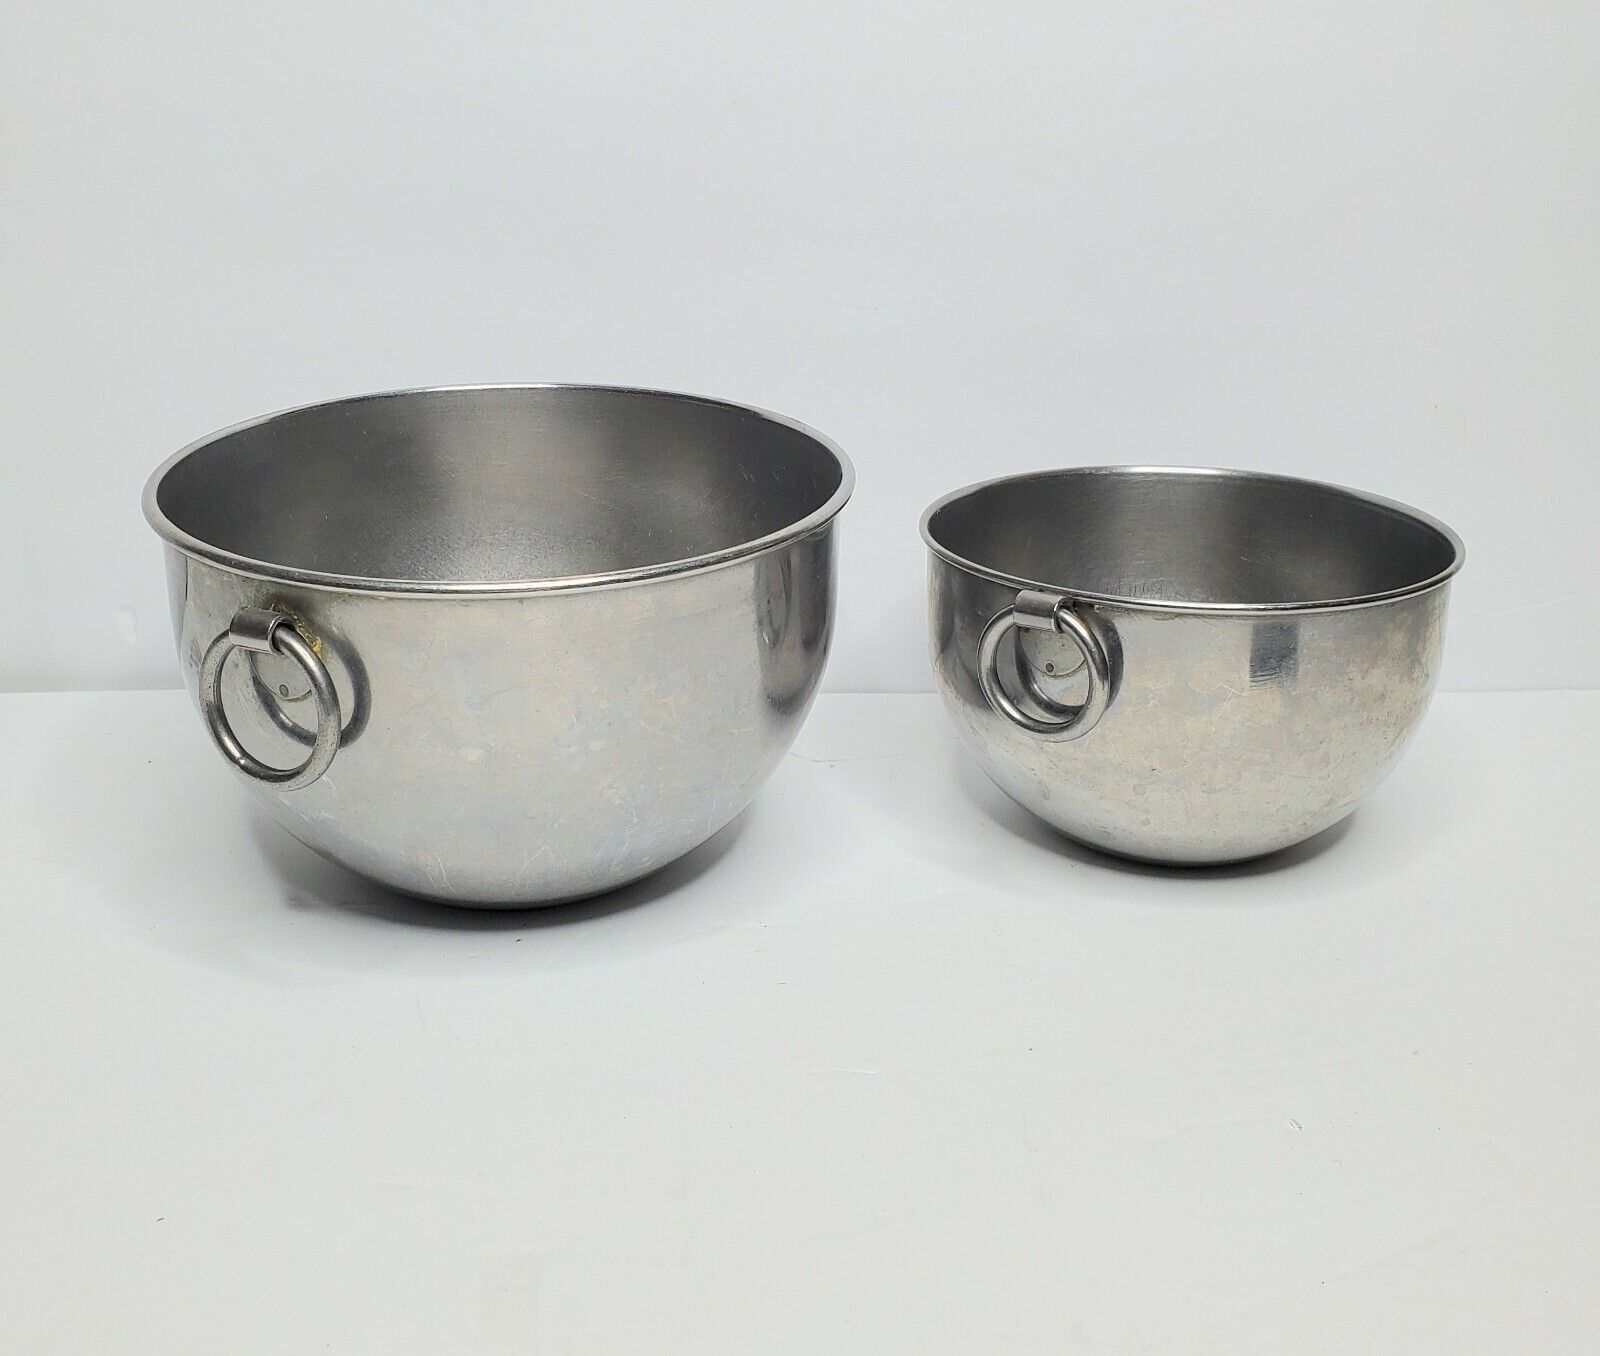 1940s Revere Ware 1801 Round O-Ring Handle Stainless Steel Mixing Bowl Set Of 2